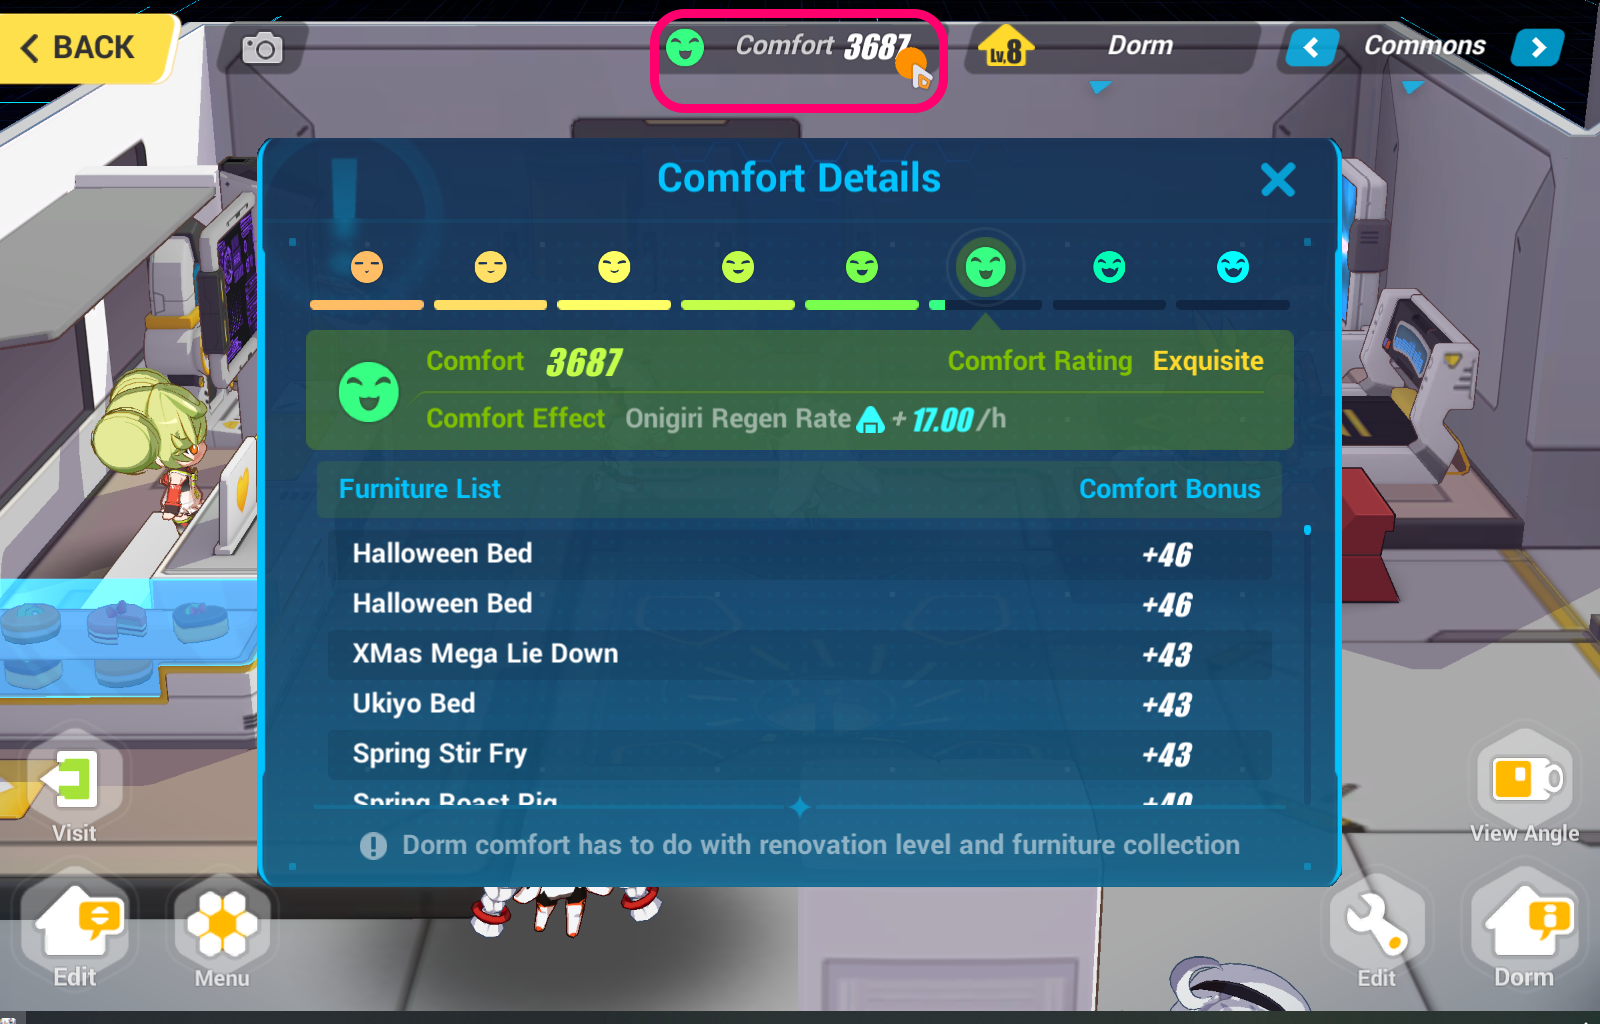 What the comfort list looks like in game.